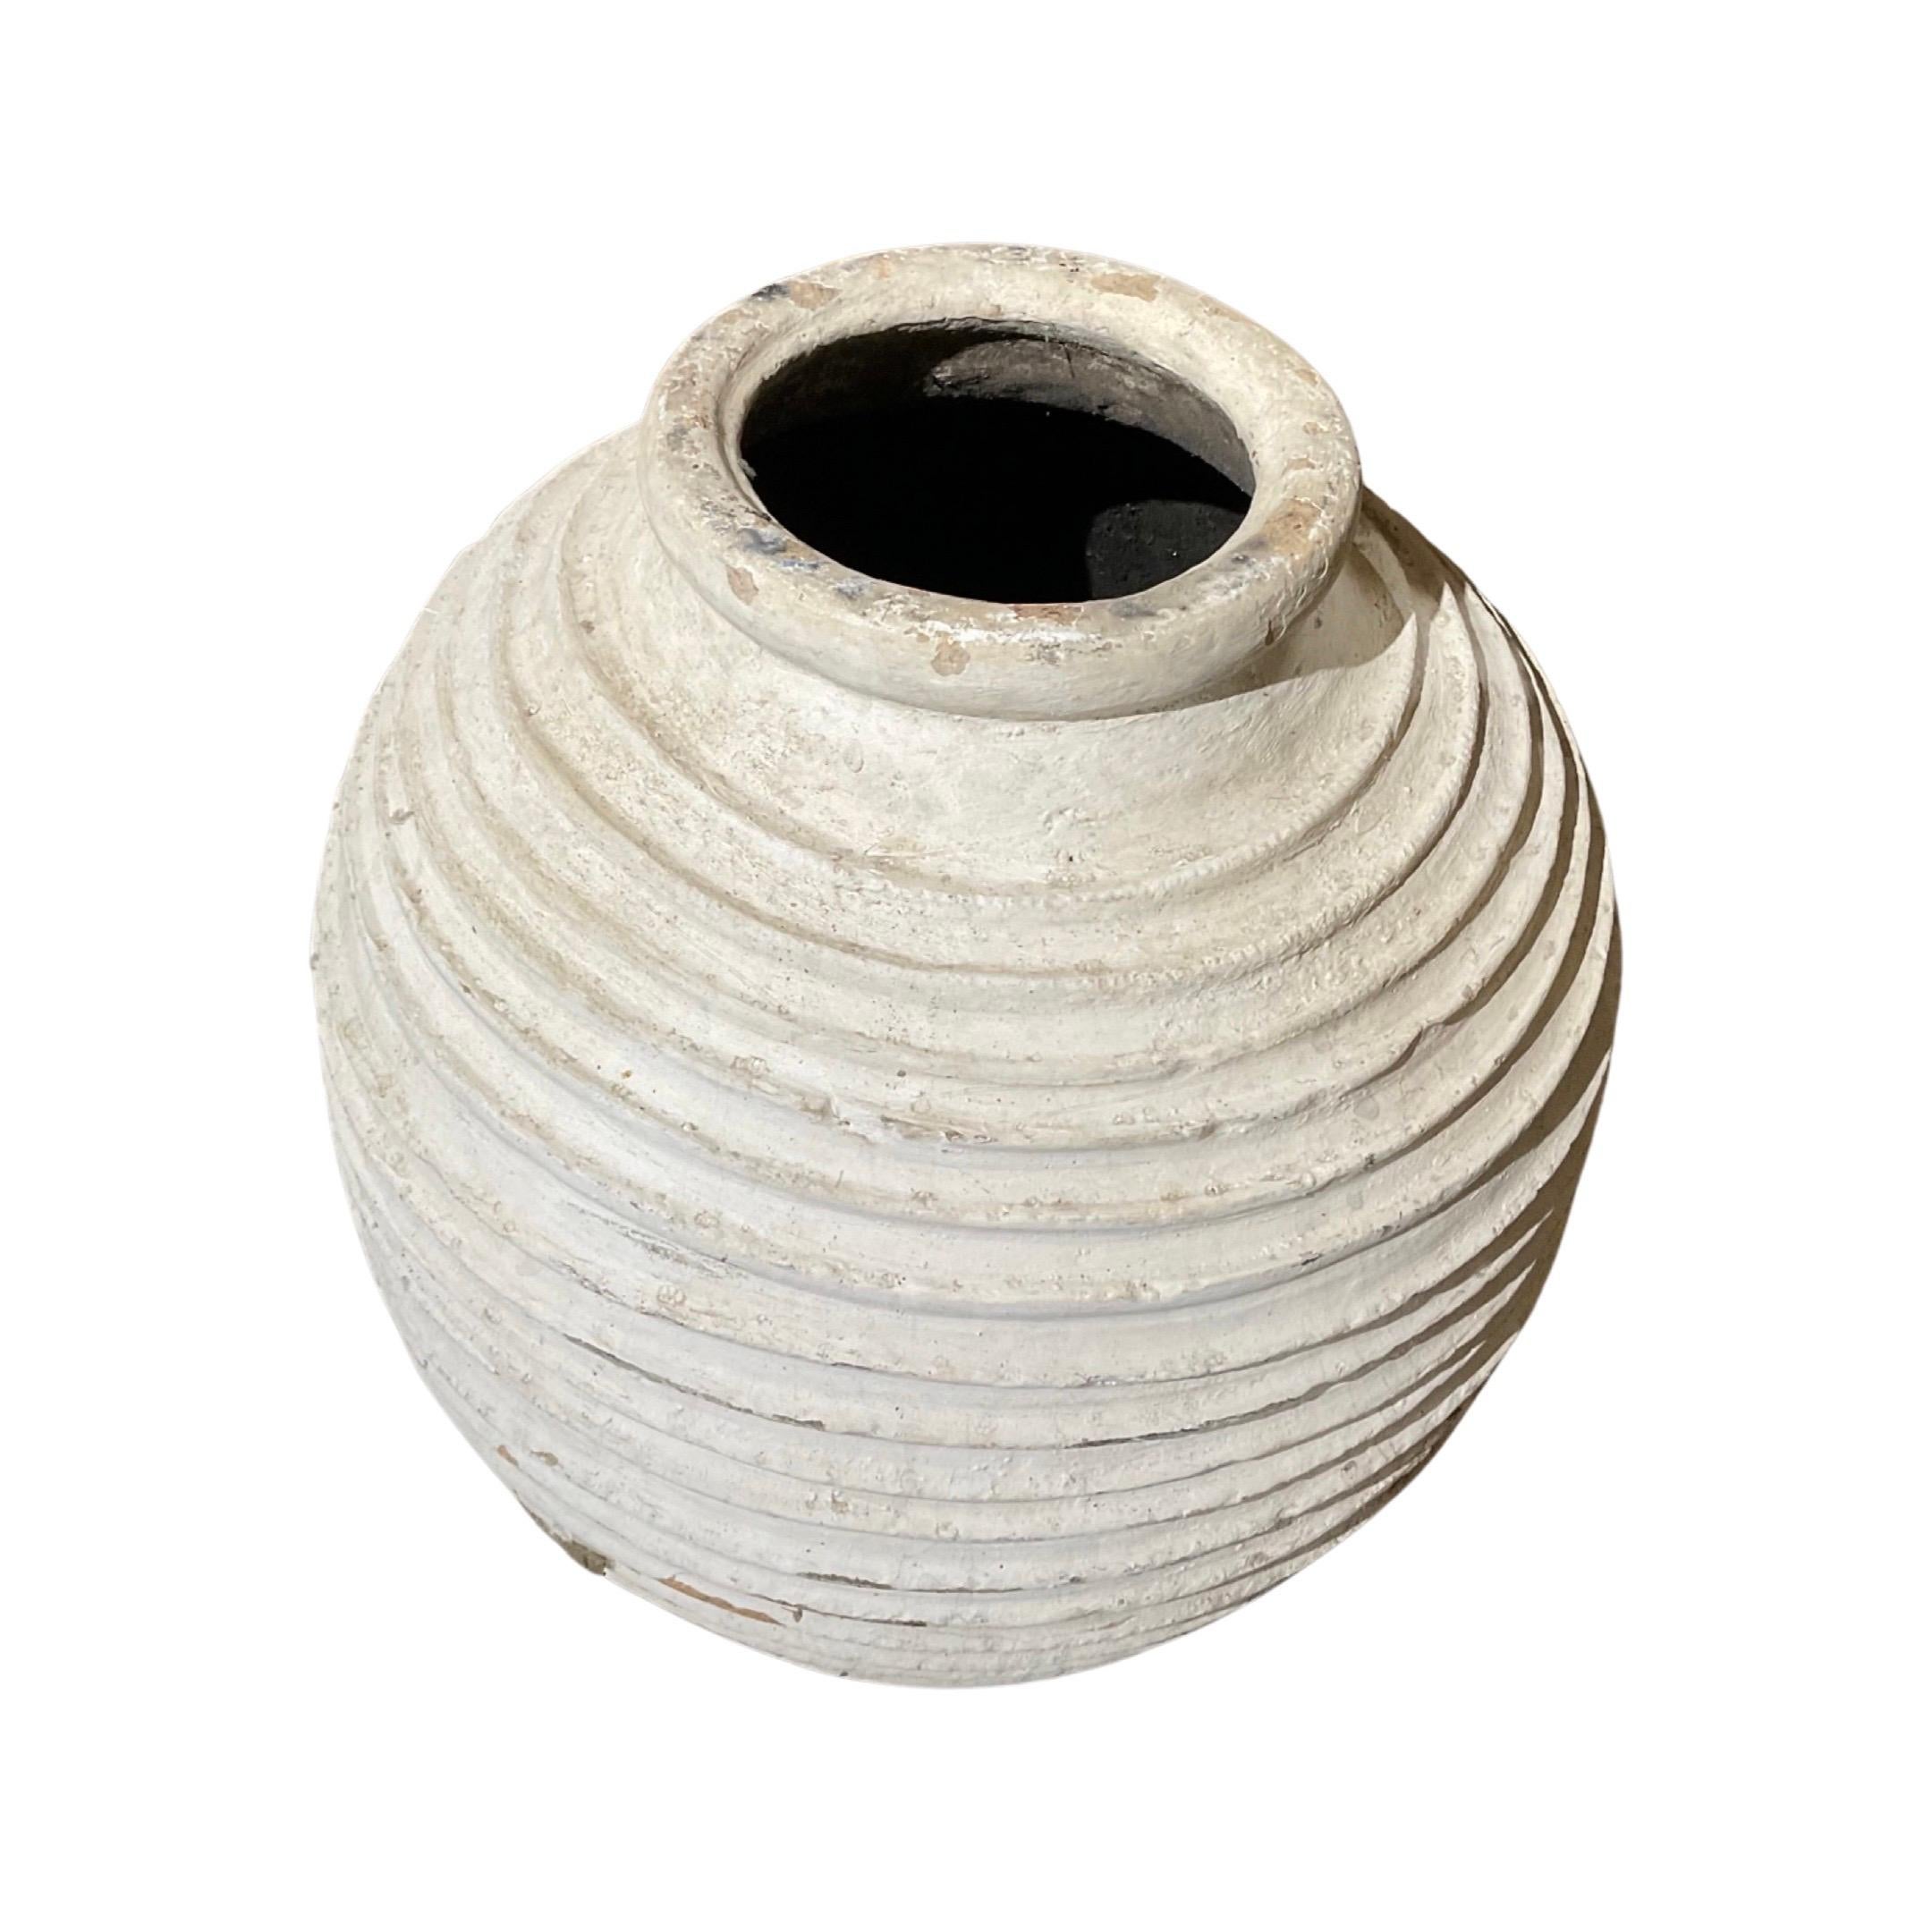 This 18th century terracotta planter is a perfect addition to any garden or home, combining classic craftsmanship with modern style. Crafted in Greece, it offers an authentic aesthetic with its white wash paint finish. Artistically crafted with